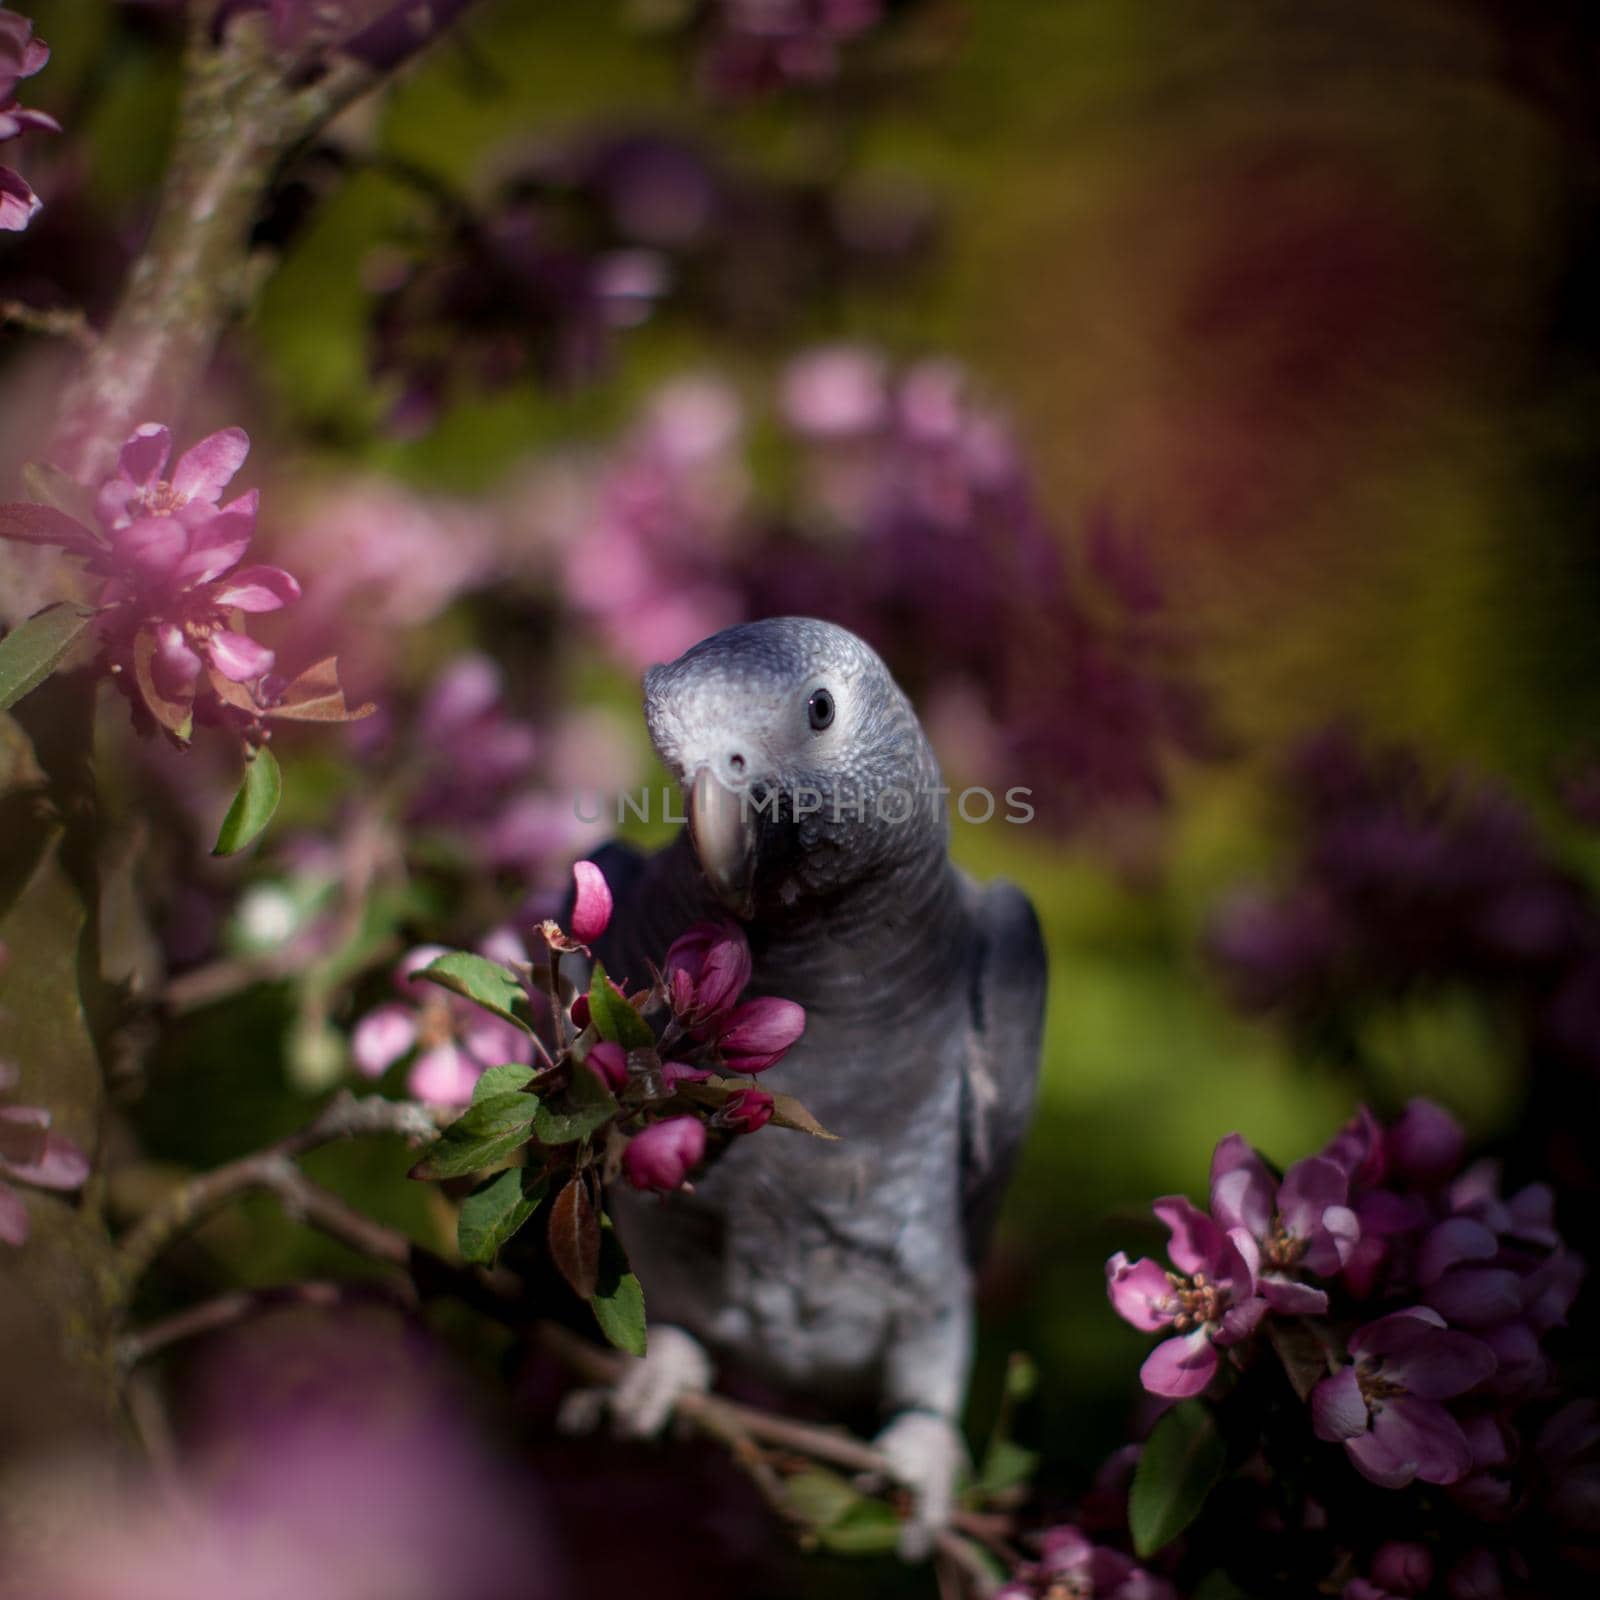 African Grey Parrot, Psittacus erithacus timneh, on the apple tree in spring garden